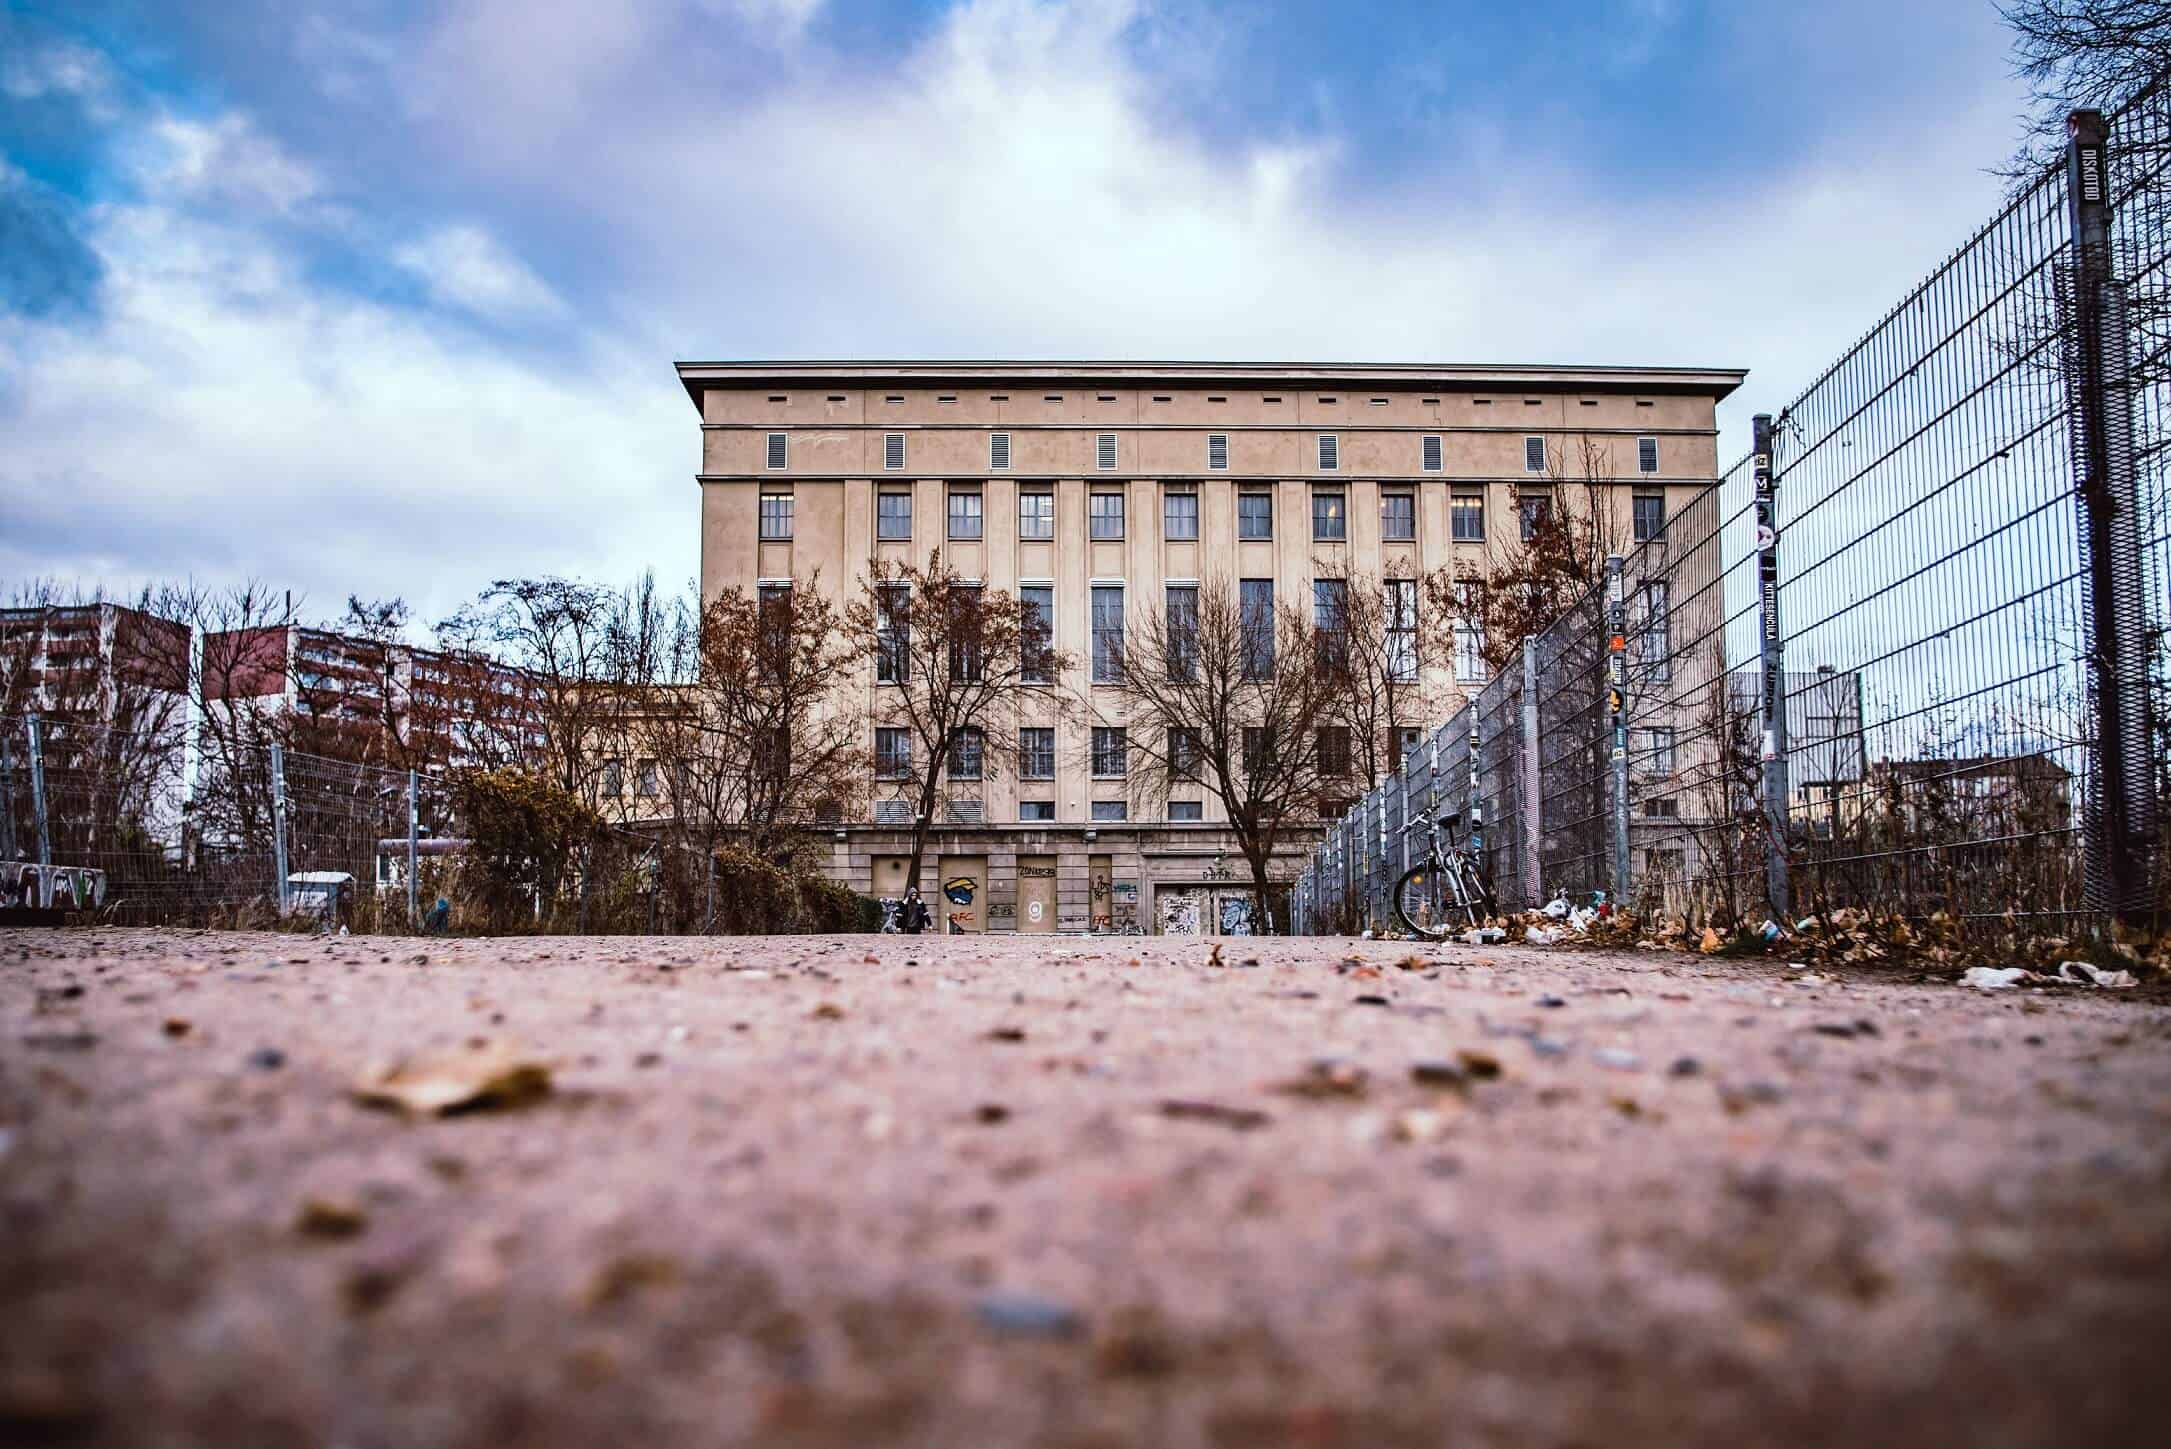 Berghain club announces Christmas and 18th anniversary events